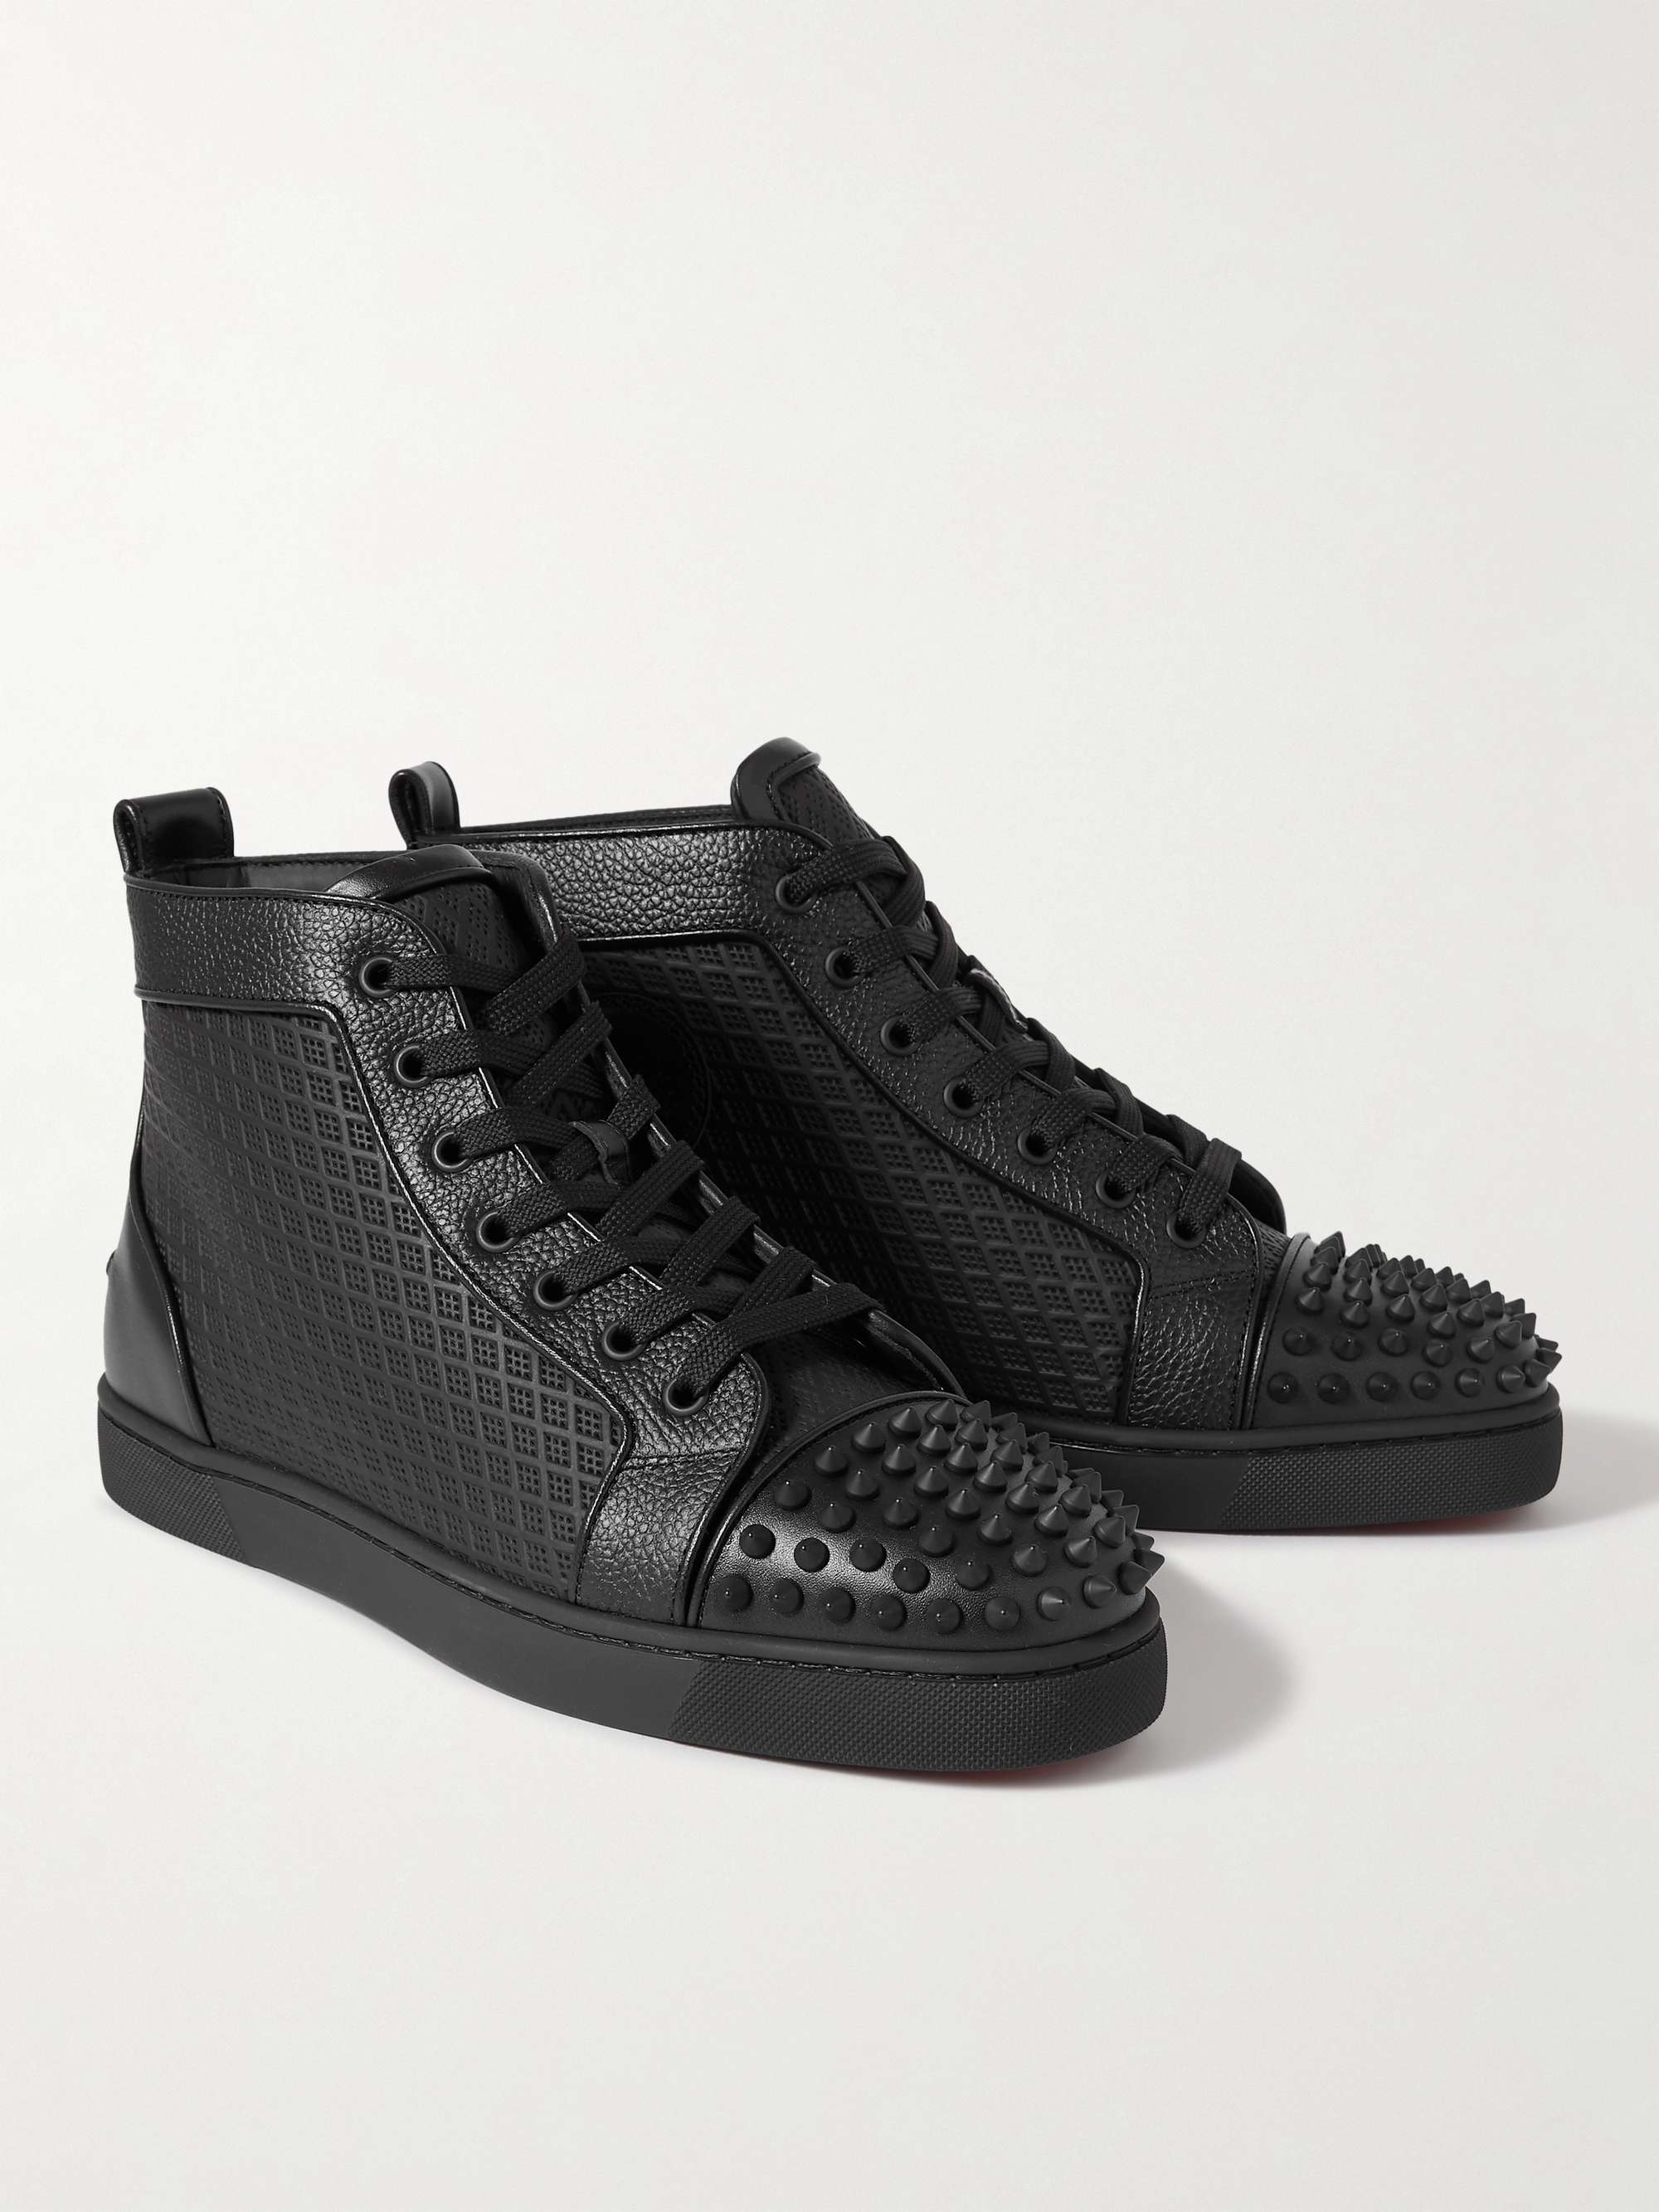 CHRISTIAN LOUBOUTIN Lou Spikes Orlato Studded Leather and Mesh High-Top  Sneakers | MR PORTER